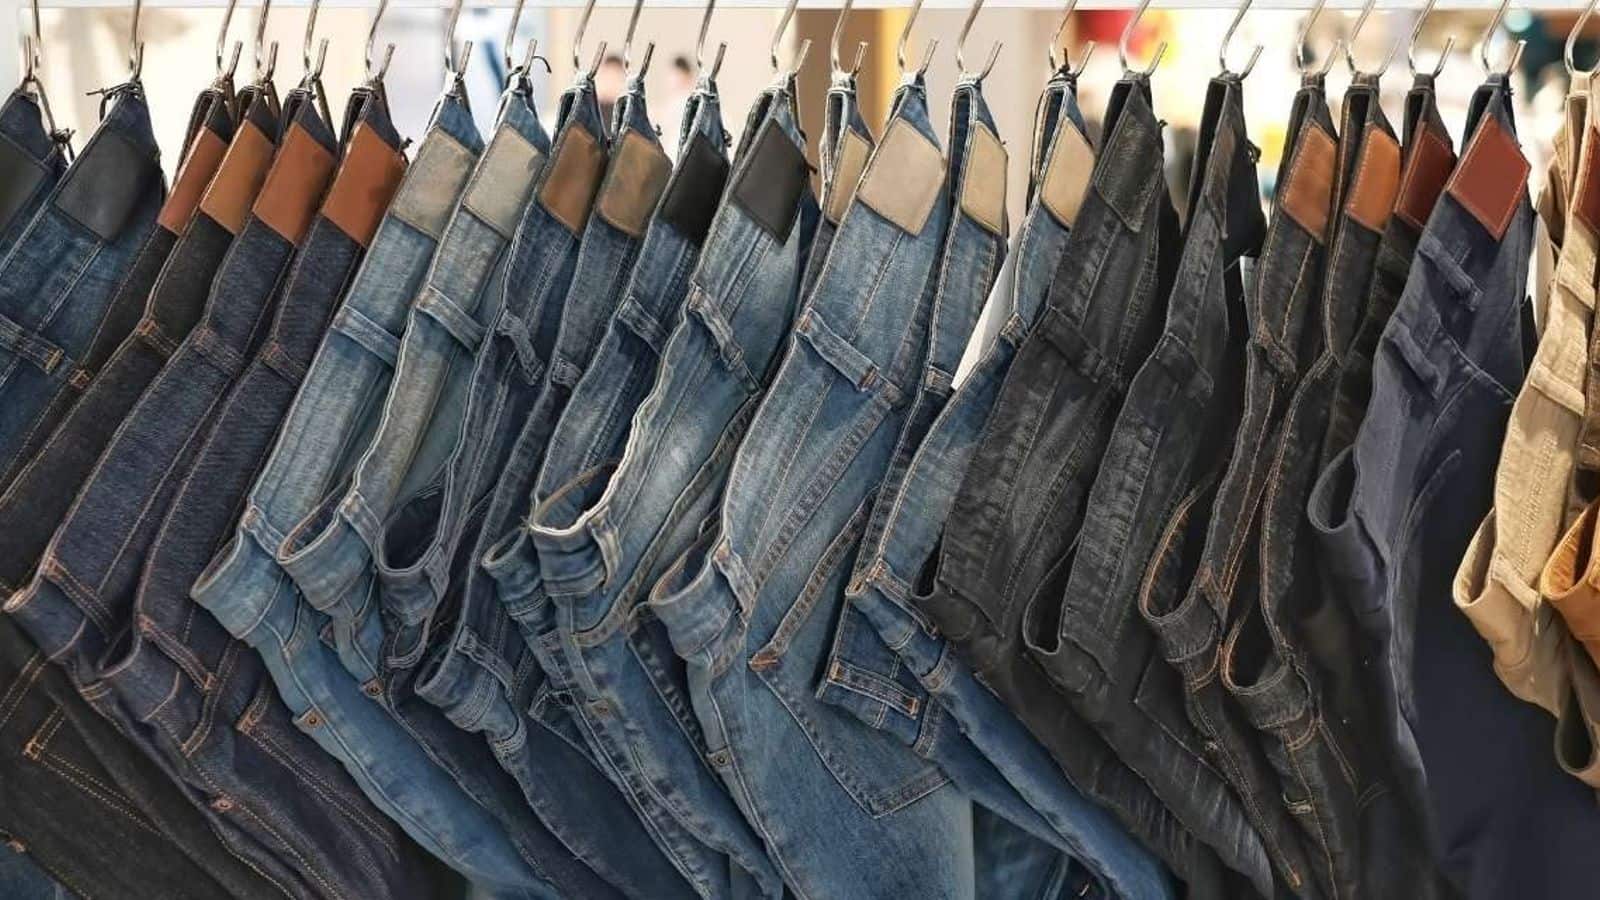 Denim for tomorrow: Tips to own ethical and eco-friendly jeans